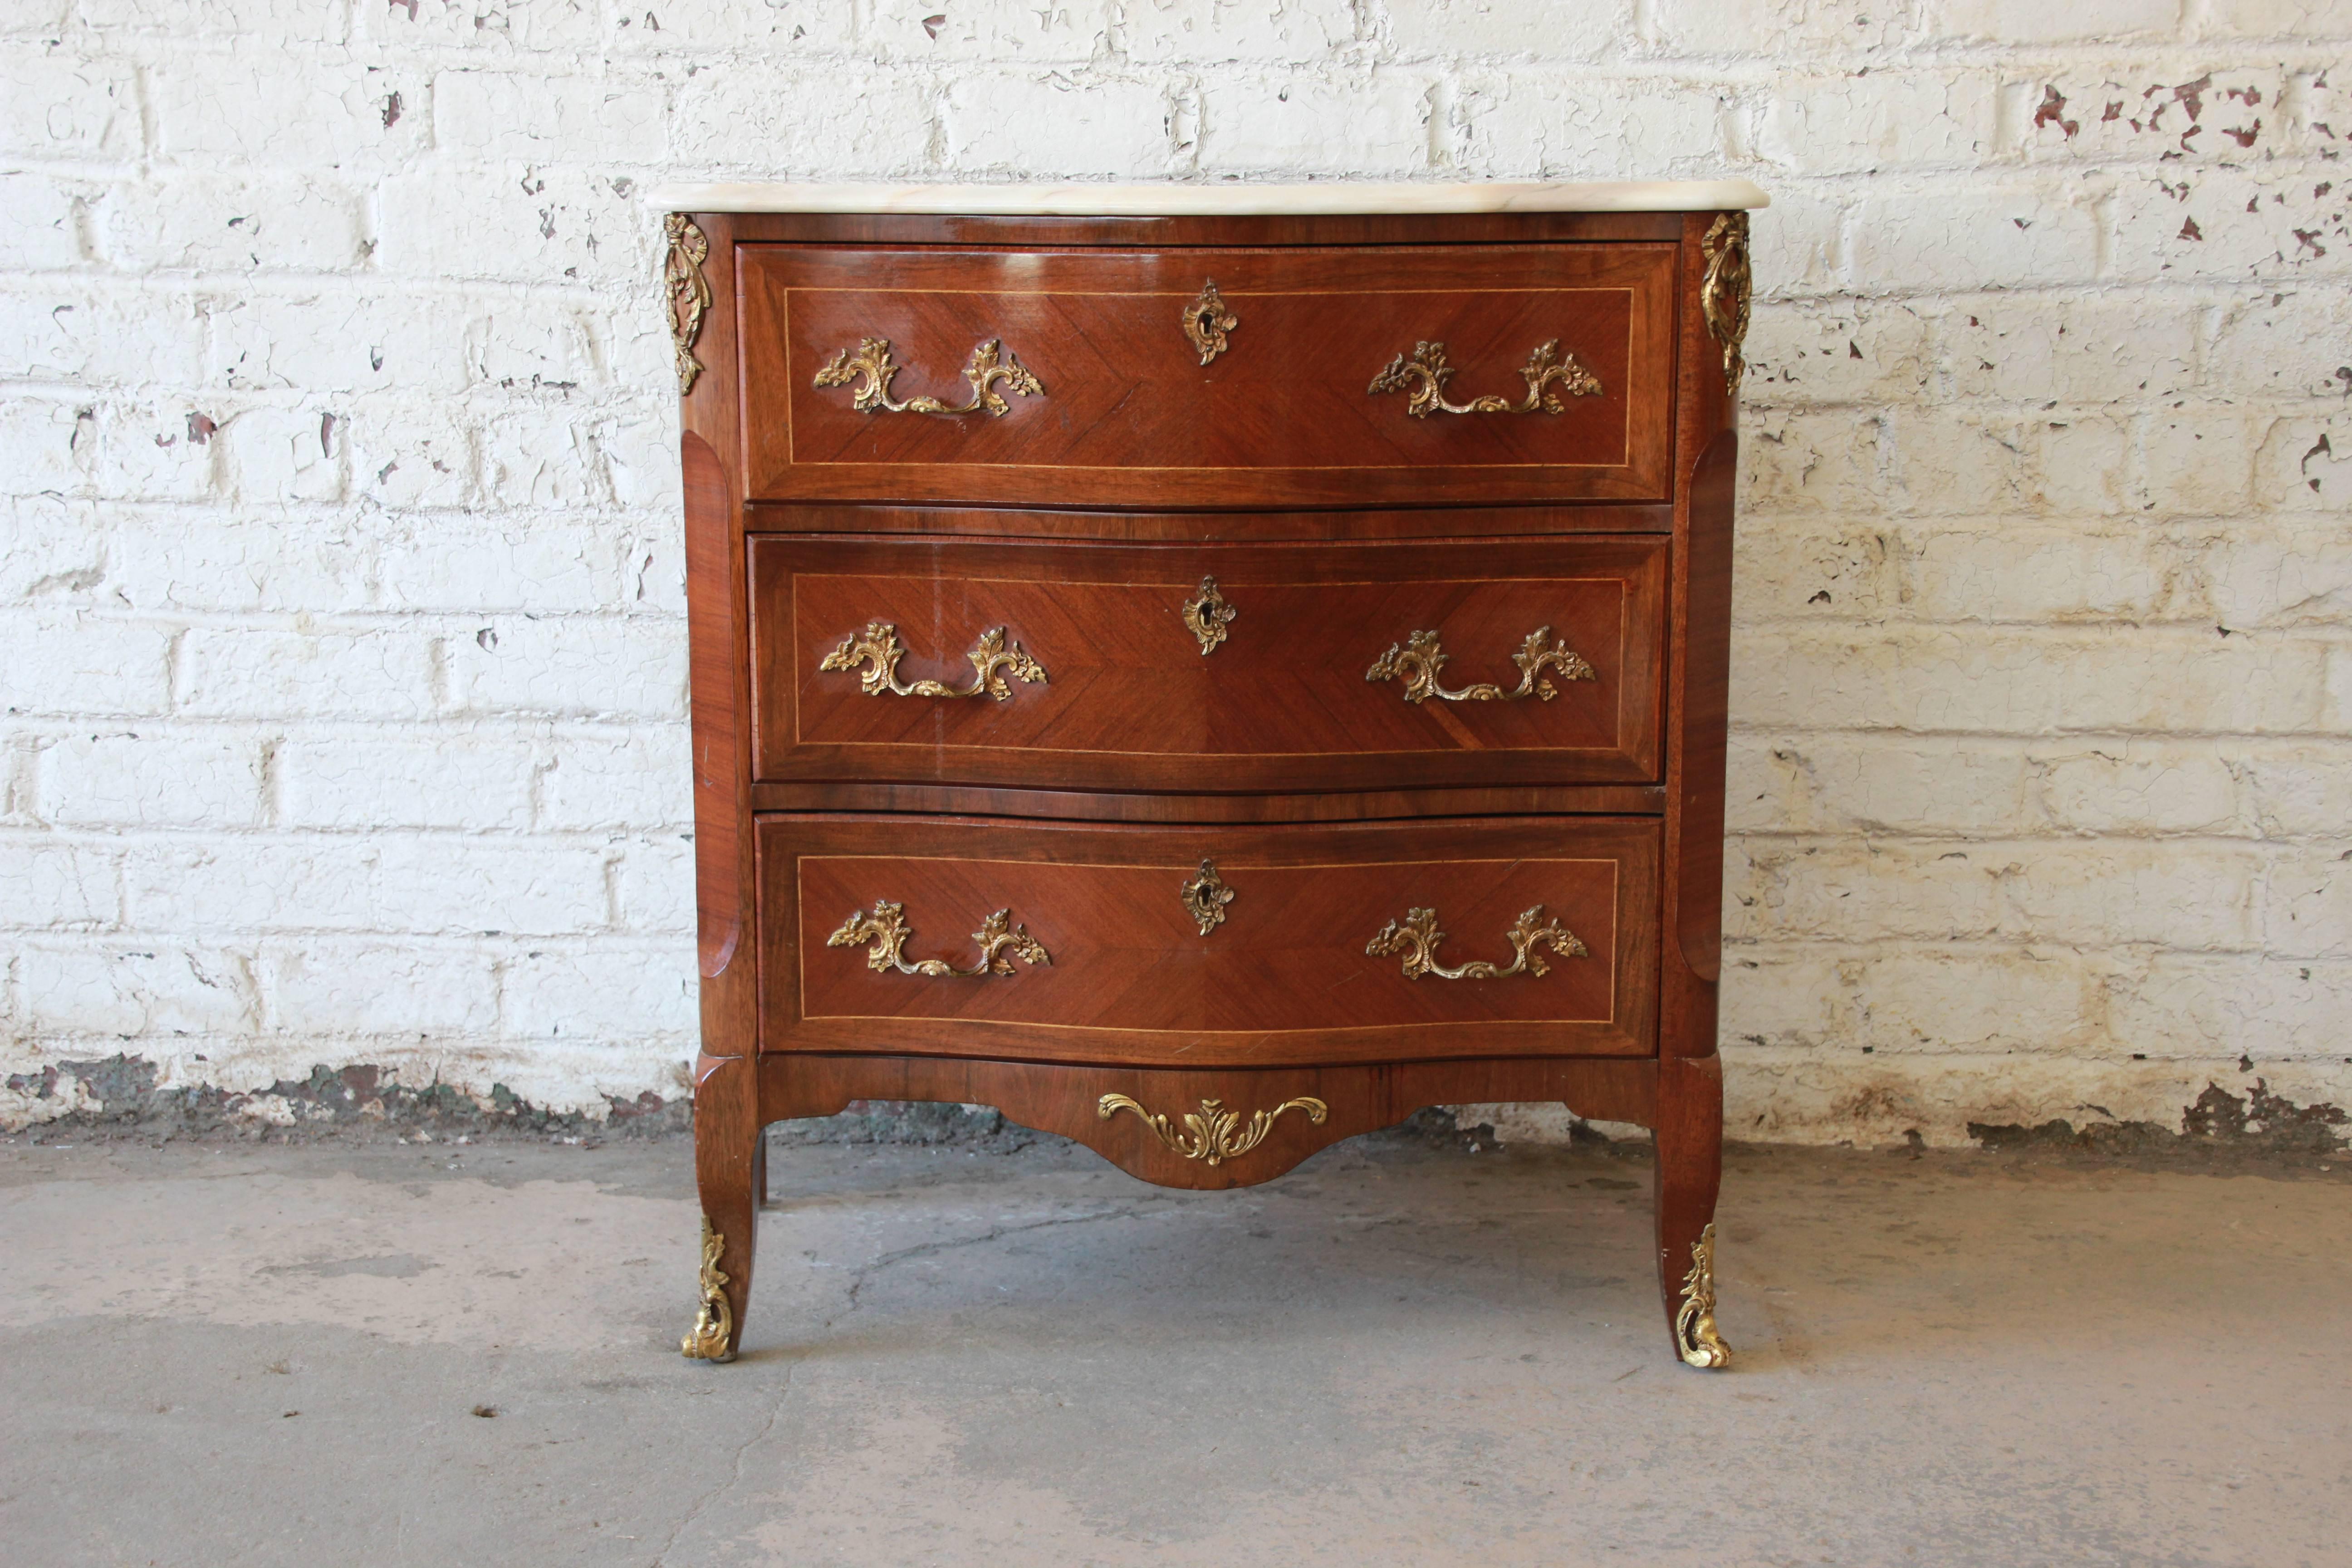 Offering a beautiful XV style commode with a marble top and bronze ormolu. The chest offers three large drawers for storage options with nice accented bronze ormolu. It also features parquetry design on the drawers and sides of the cabinet. The